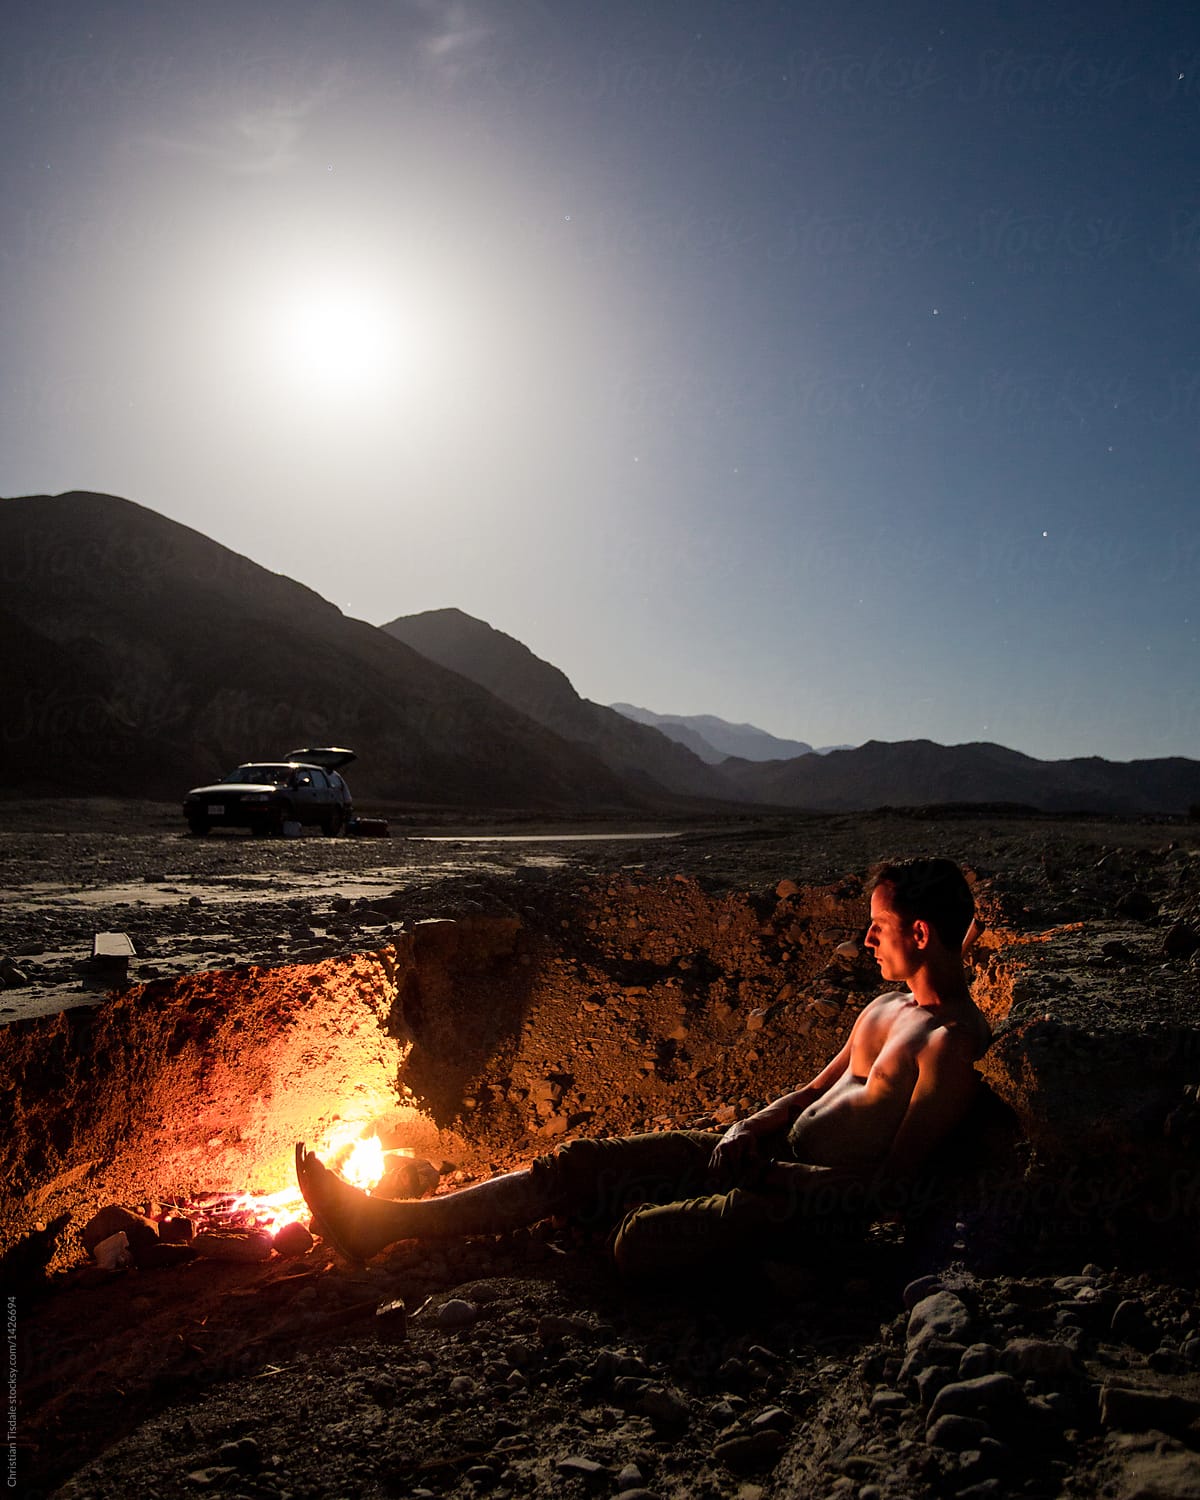 A young man sitting beside a fire under the moonlight in the desert